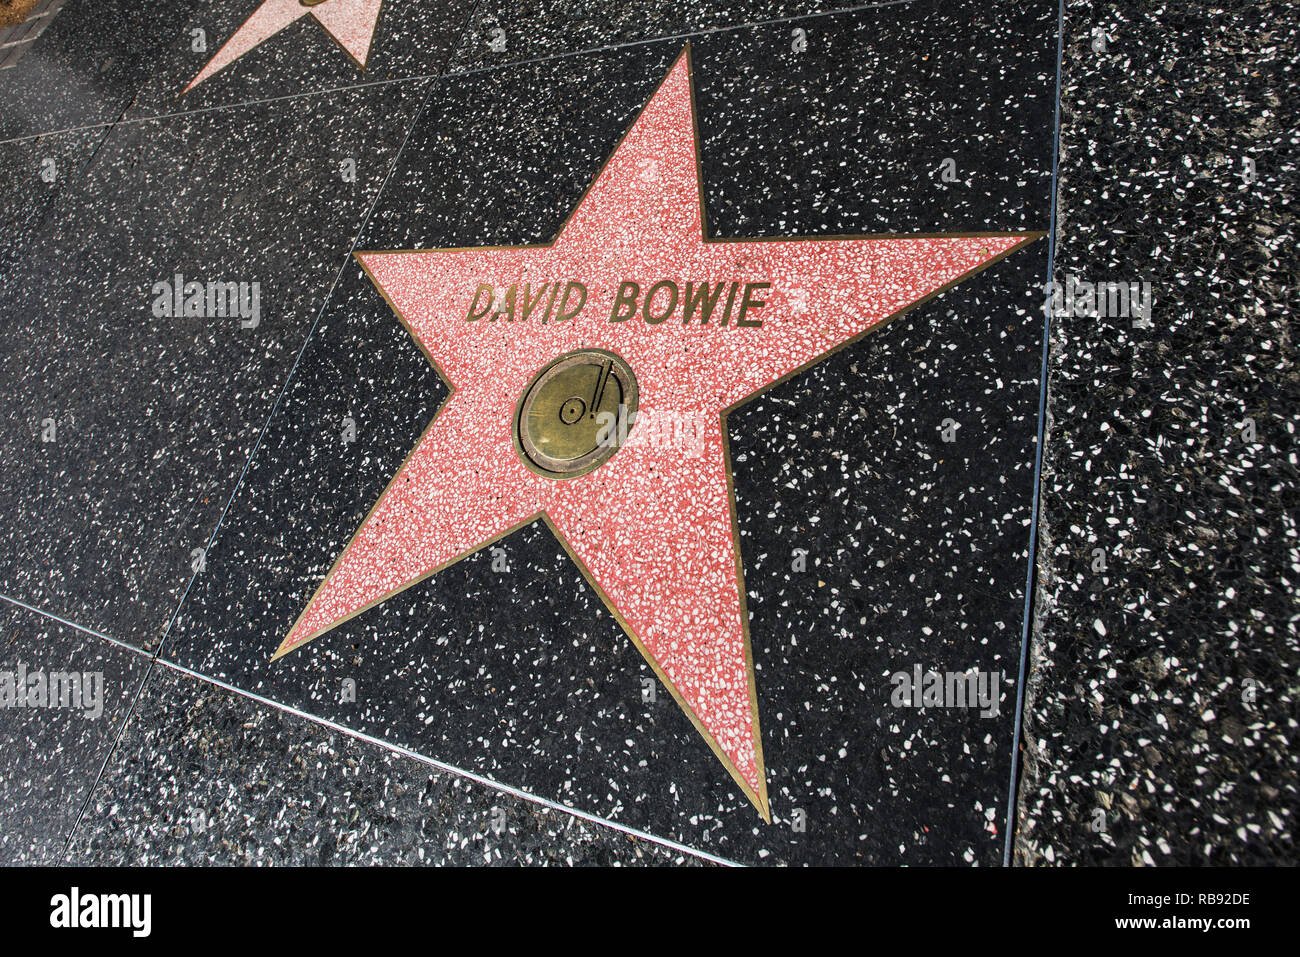 David Bowie. Hollywood Walk of Fame. Hollywood Boulevard. Foto Stock